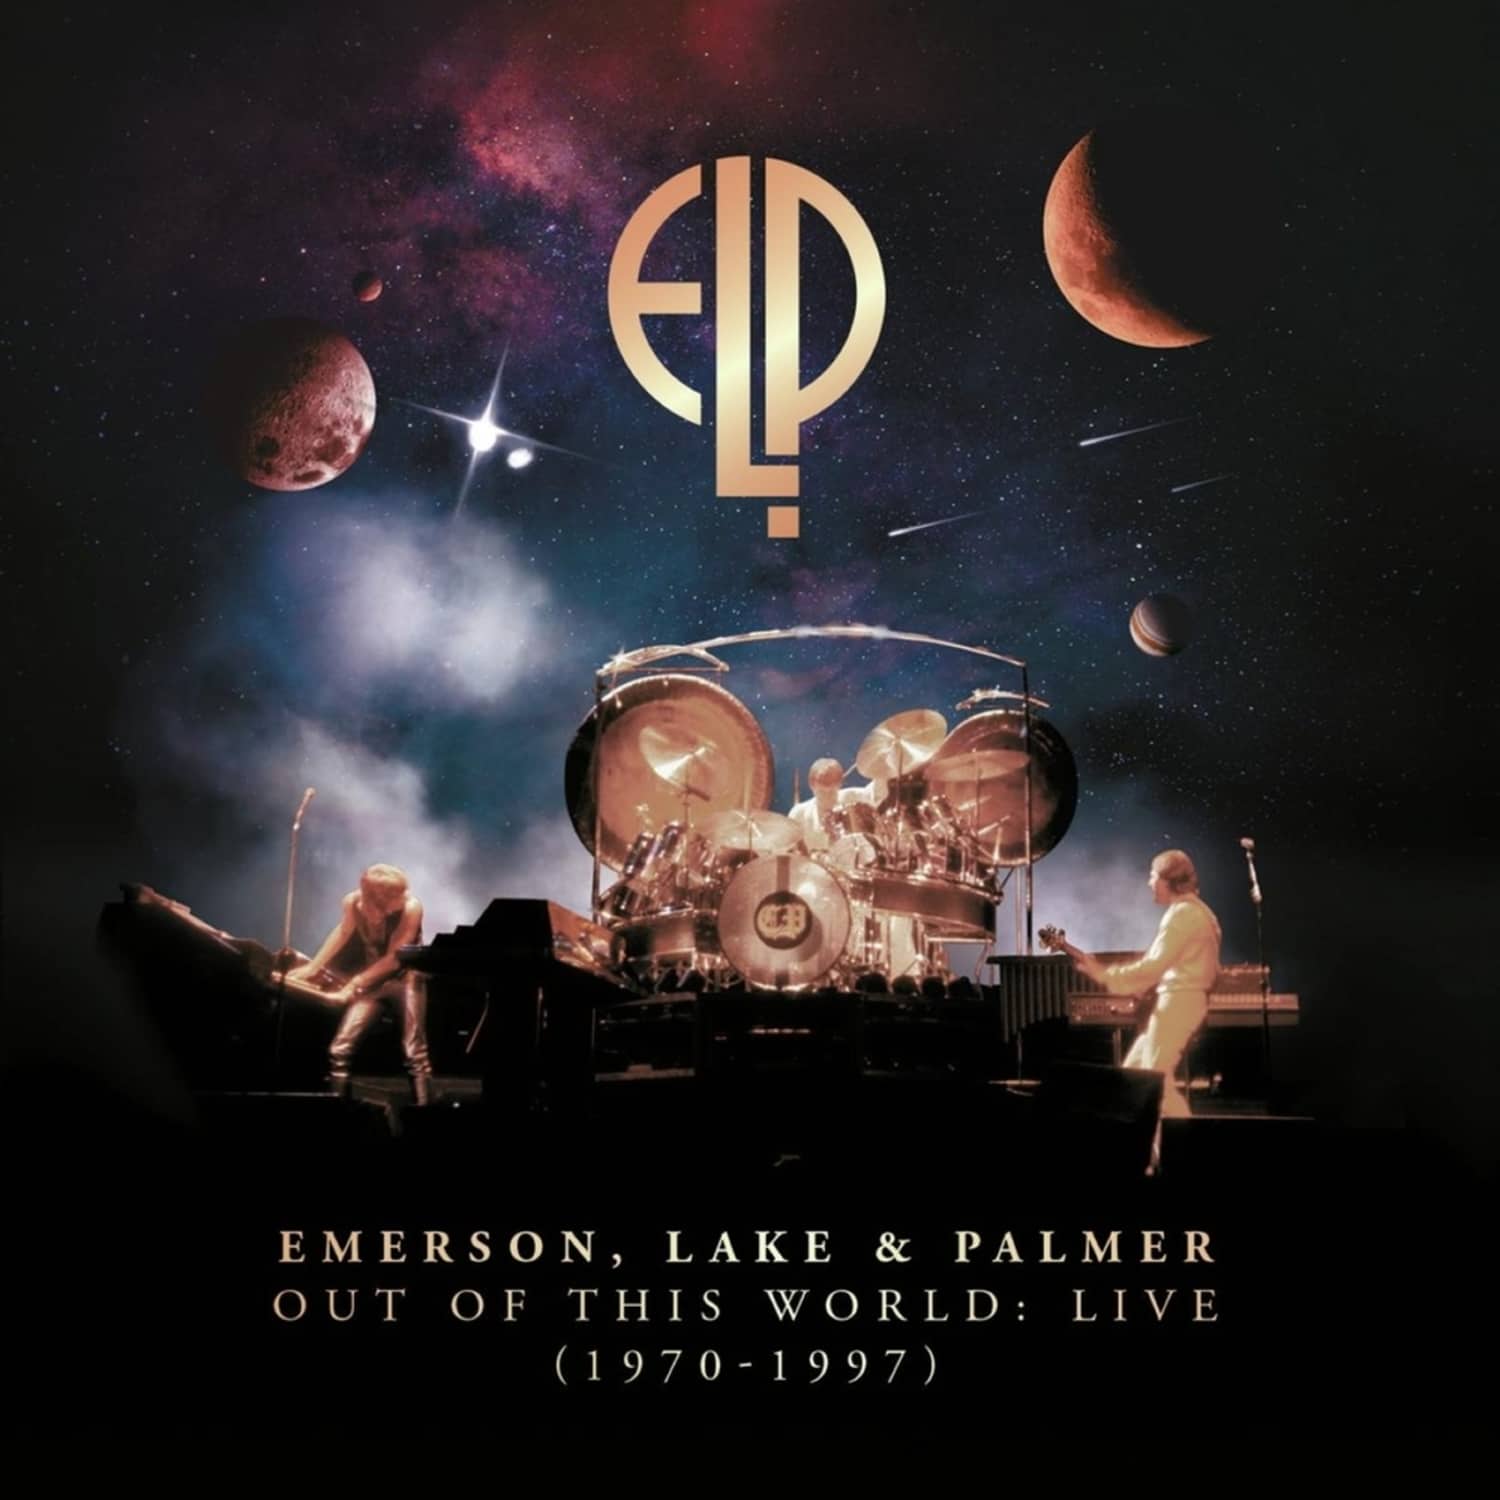 Lake & Palmer Emerson - OUT OF THIS WORLD:LIVE 